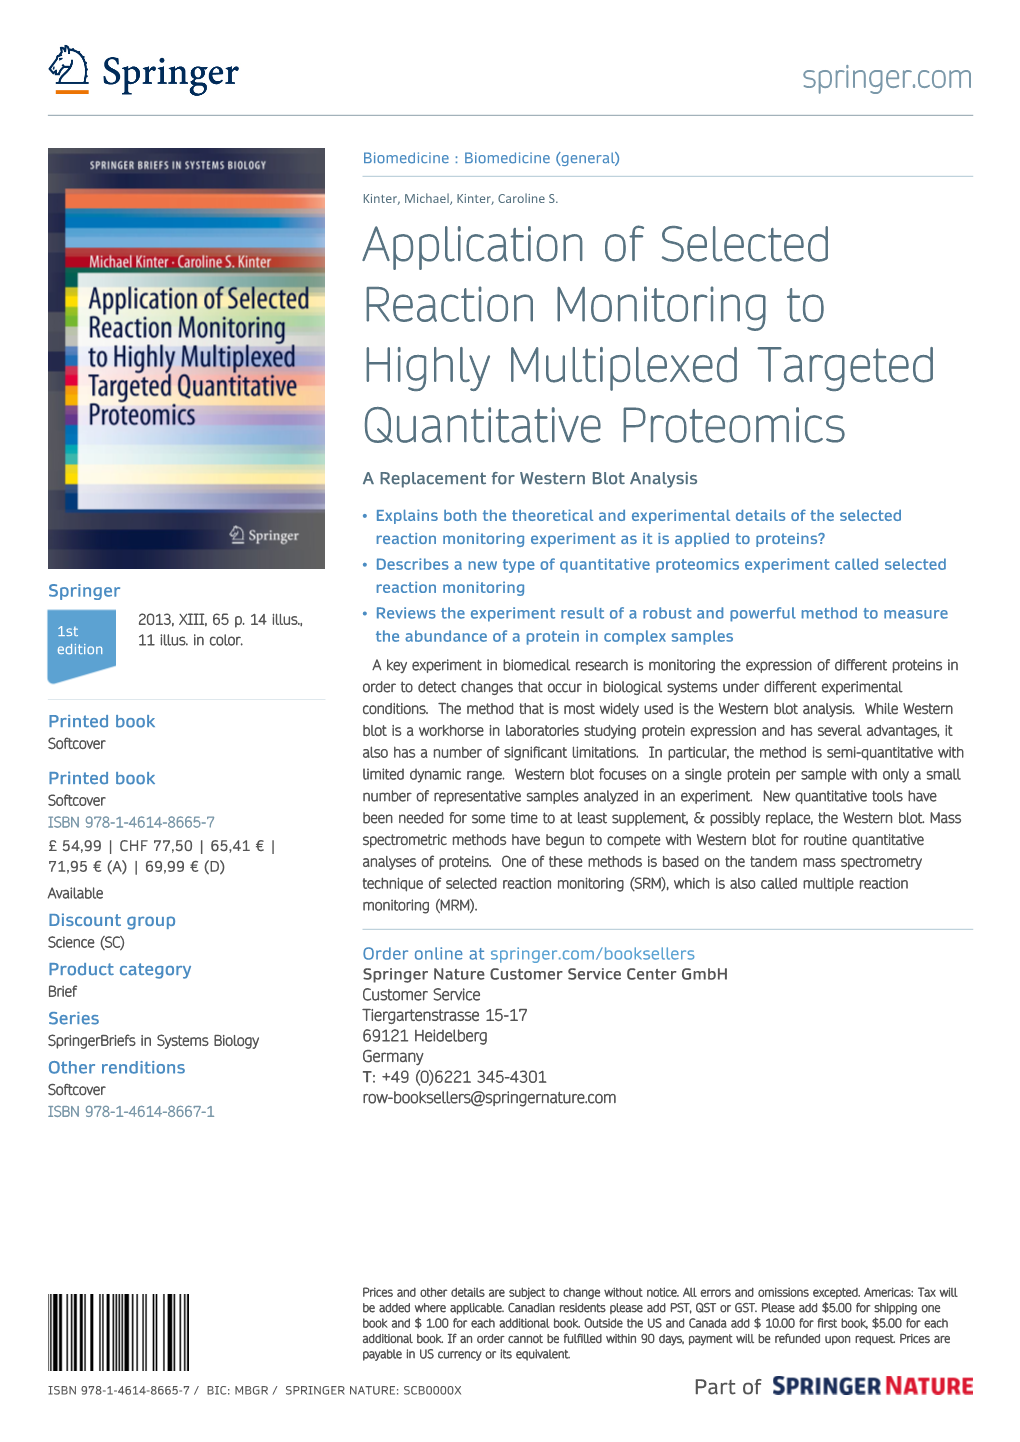 Application of Selected Reaction Monitoring to Highly Multiplexed Targeted Quantitative Proteomics a Replacement for Western Blot Analysis